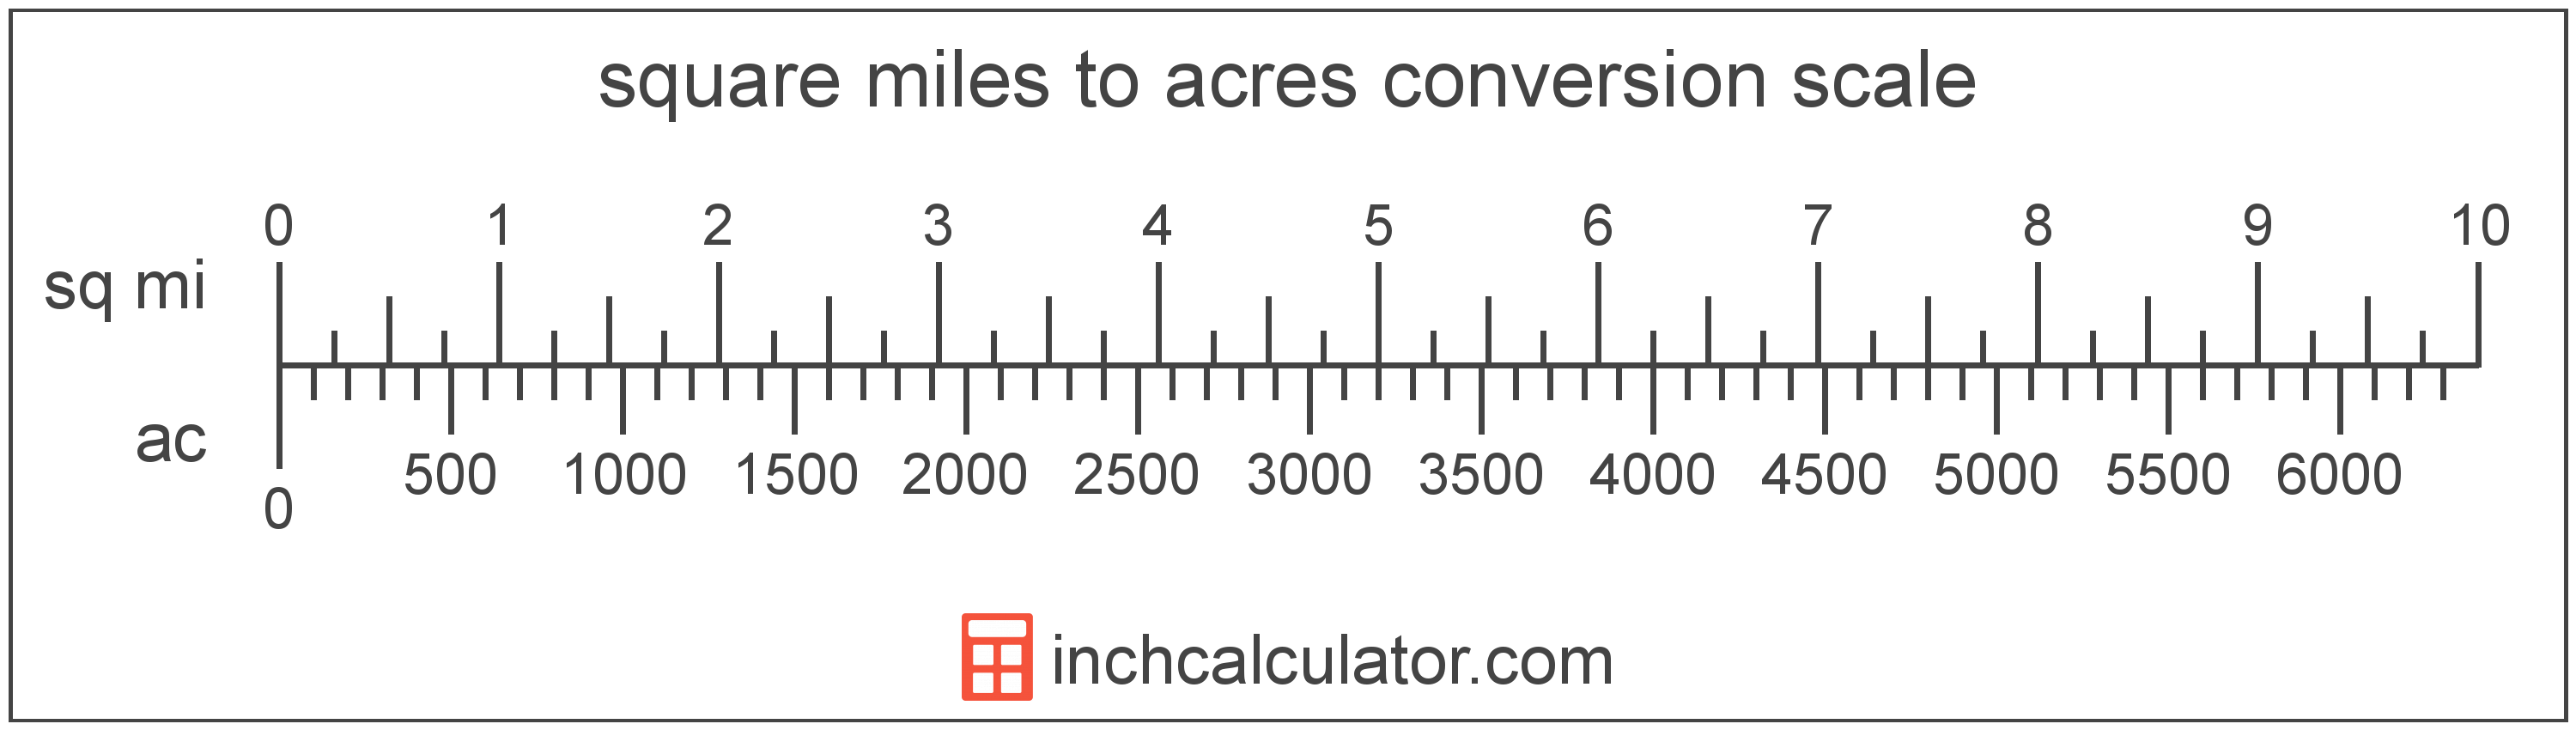 conversion scale showing square miles and equivalent acres area values